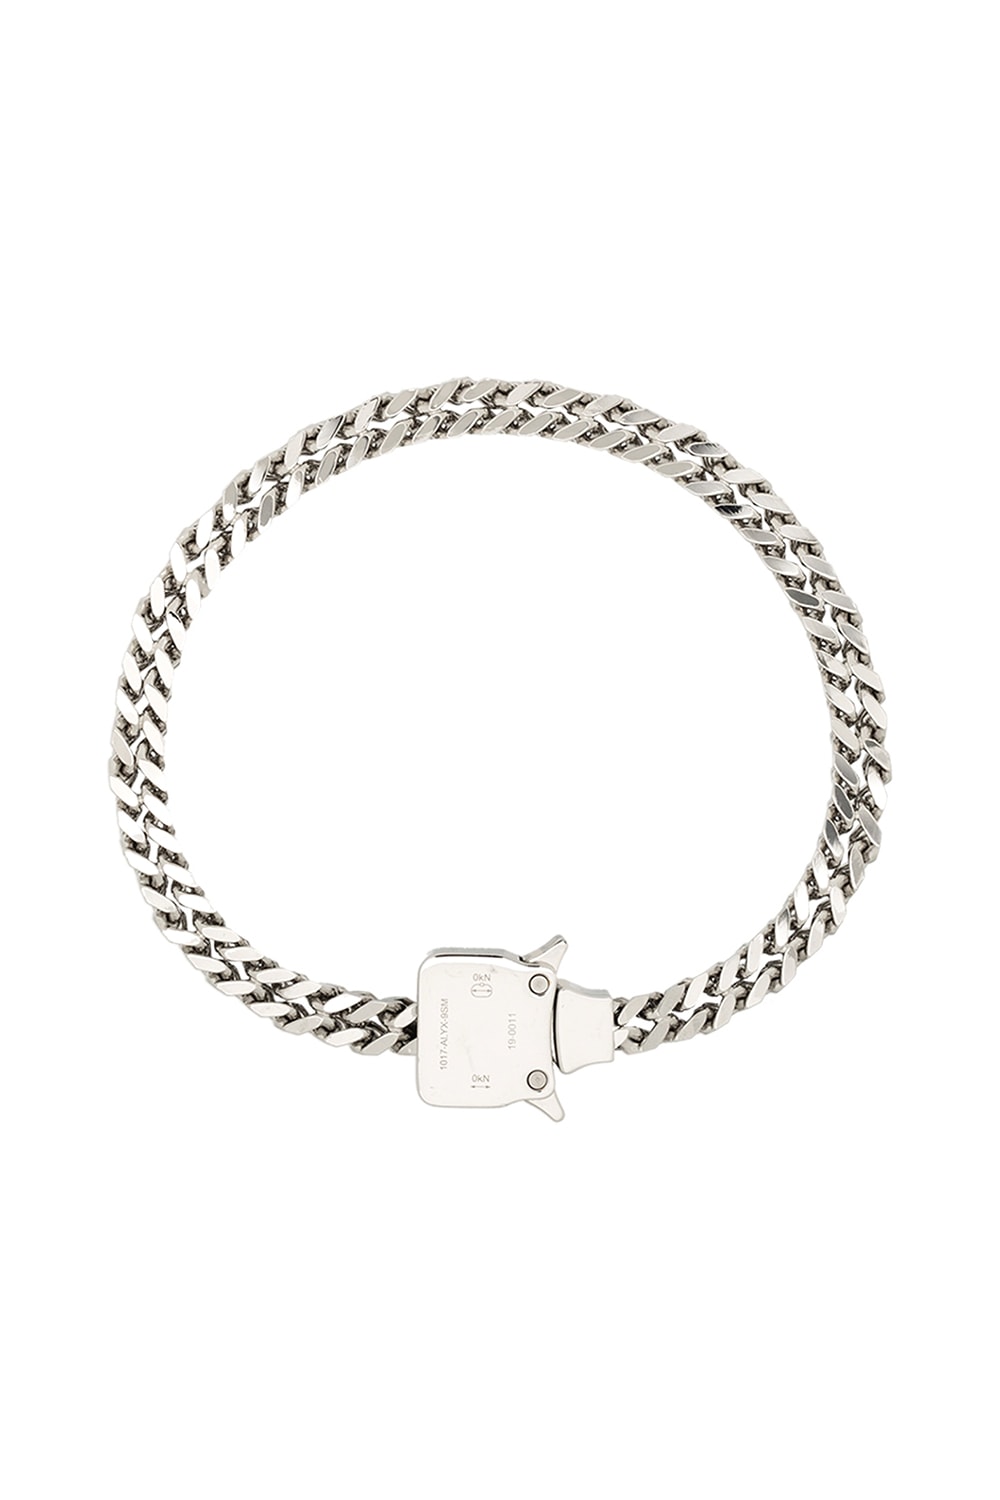 1017 ALYX 9SM Drops Silver Tone Cubix Chain Necklace rollercoaster buckle buy now drop info release accessories jewelry drake chain 